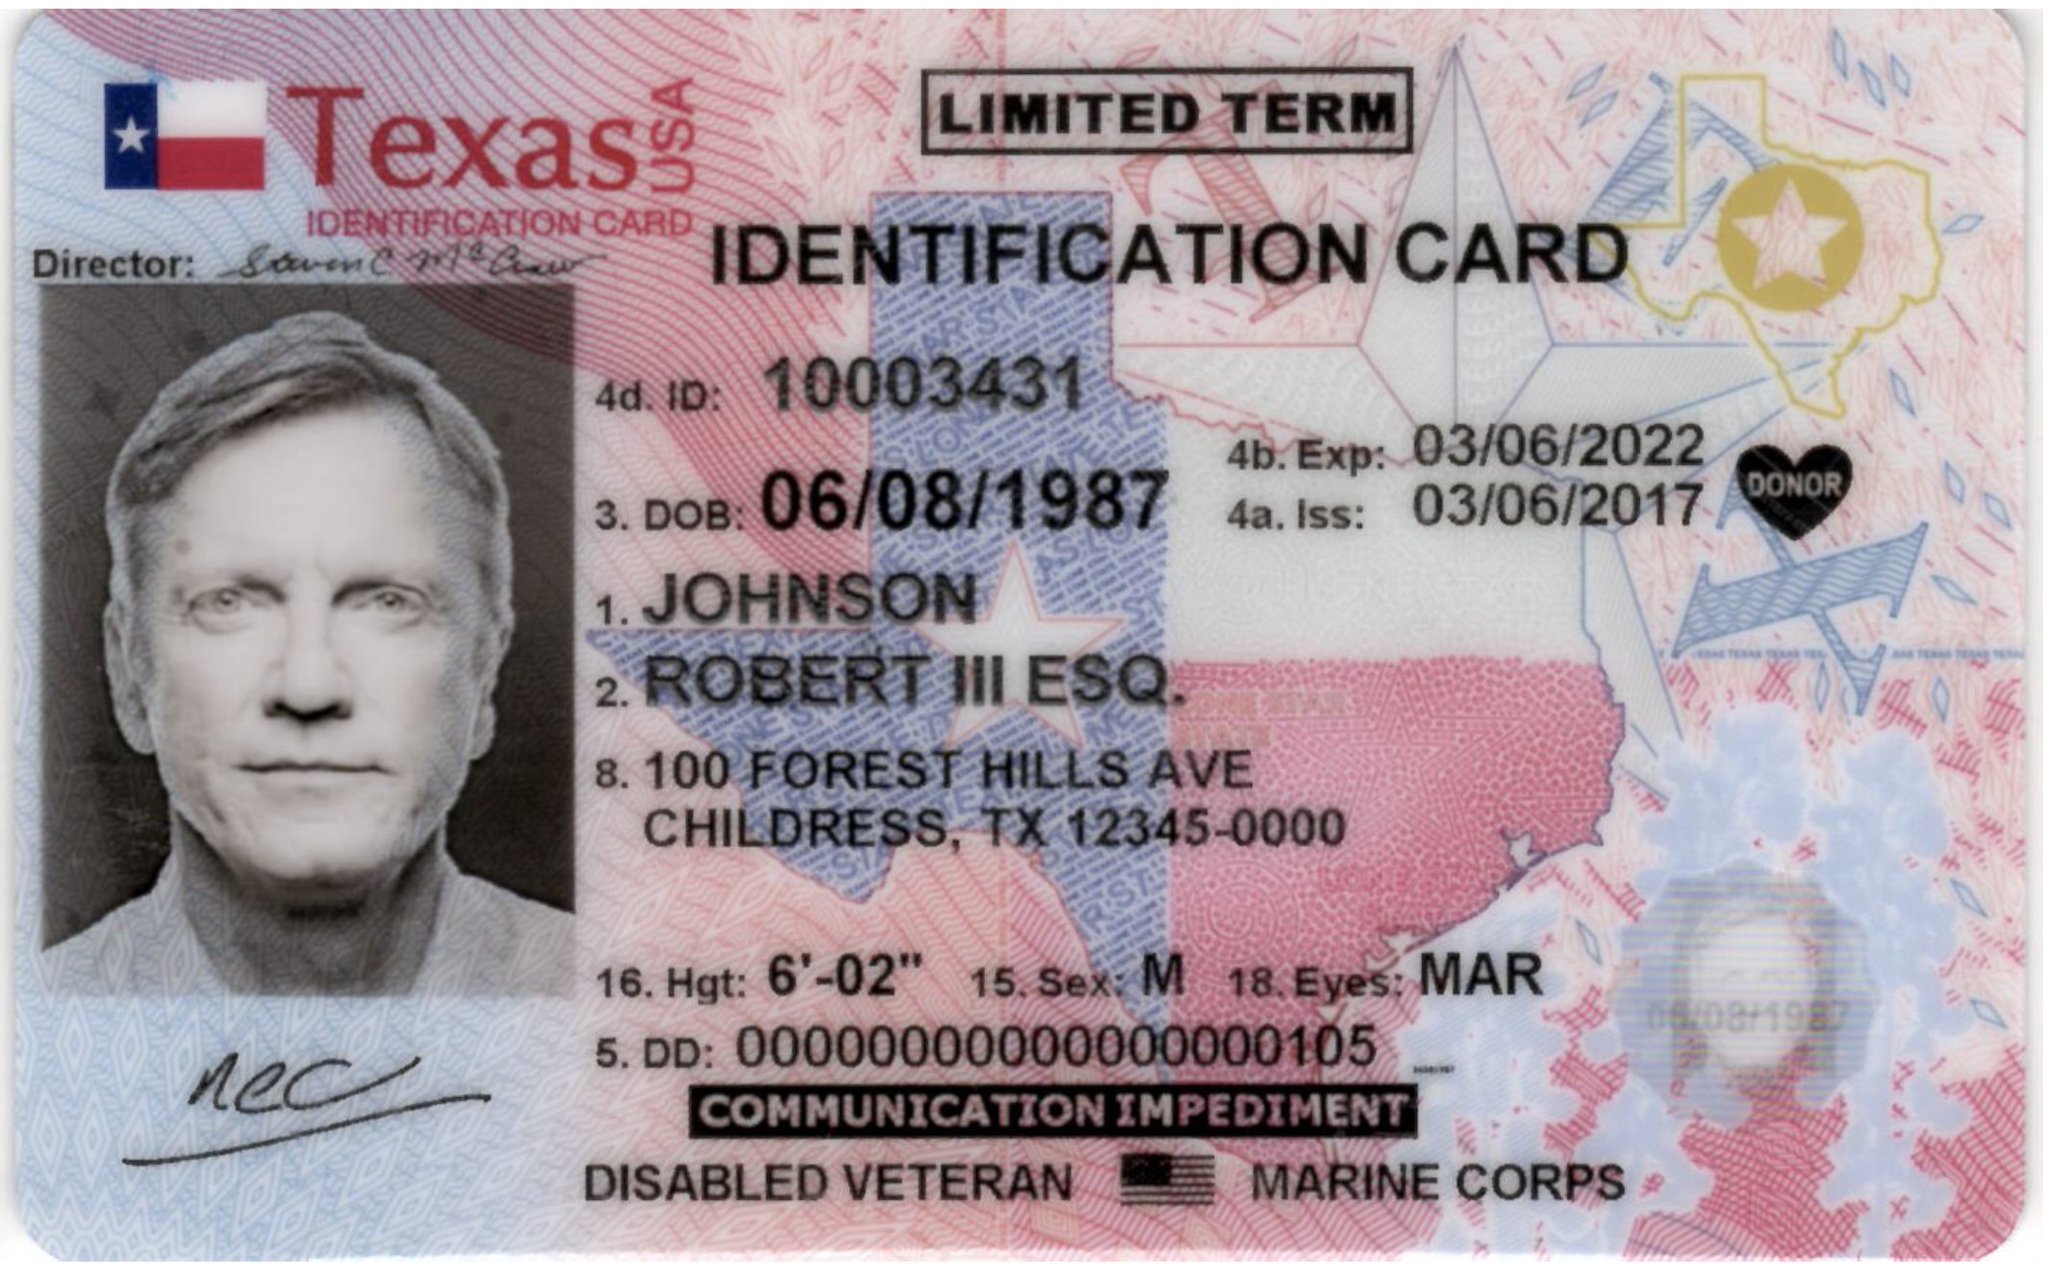 Texas Dps Did Your Driver License Dl Or Identification Card Id Expire In And You Haven T Had A Chance To Renew Now Is The Time The Temporary Waiver For